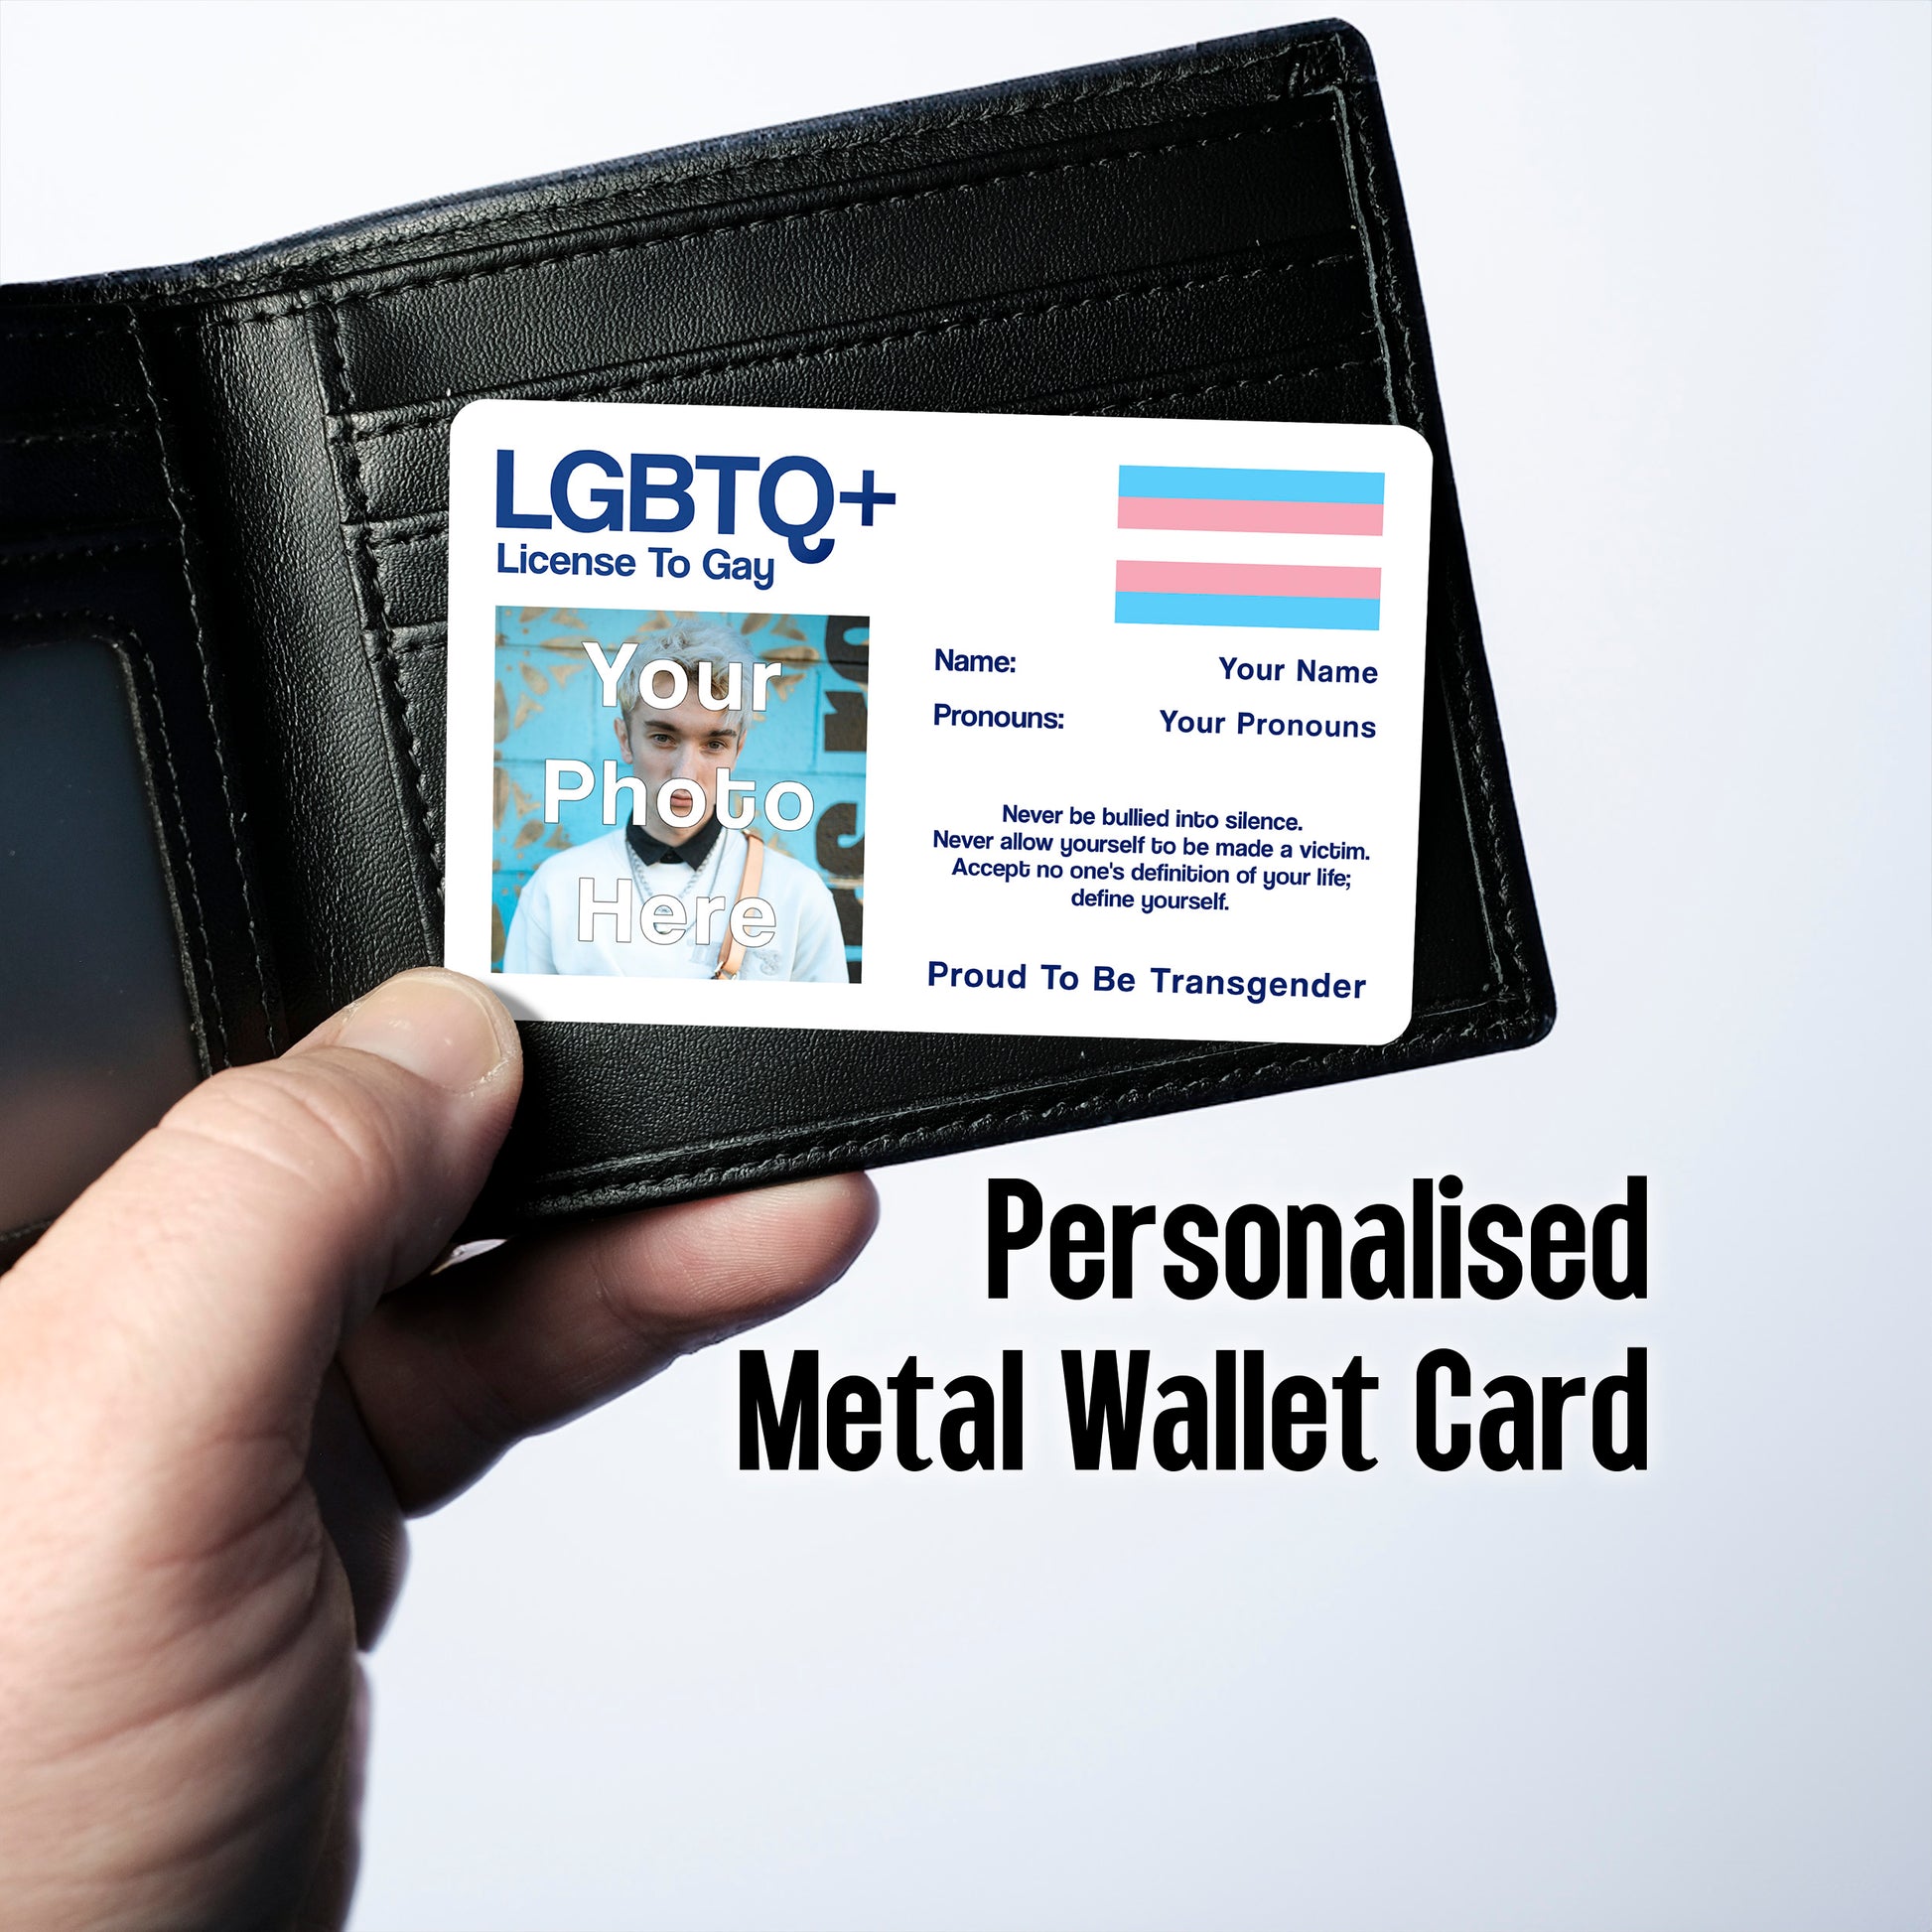 Transgender License To Gay aluminium novelty wallet card personalised with your name, pronouns, and photo